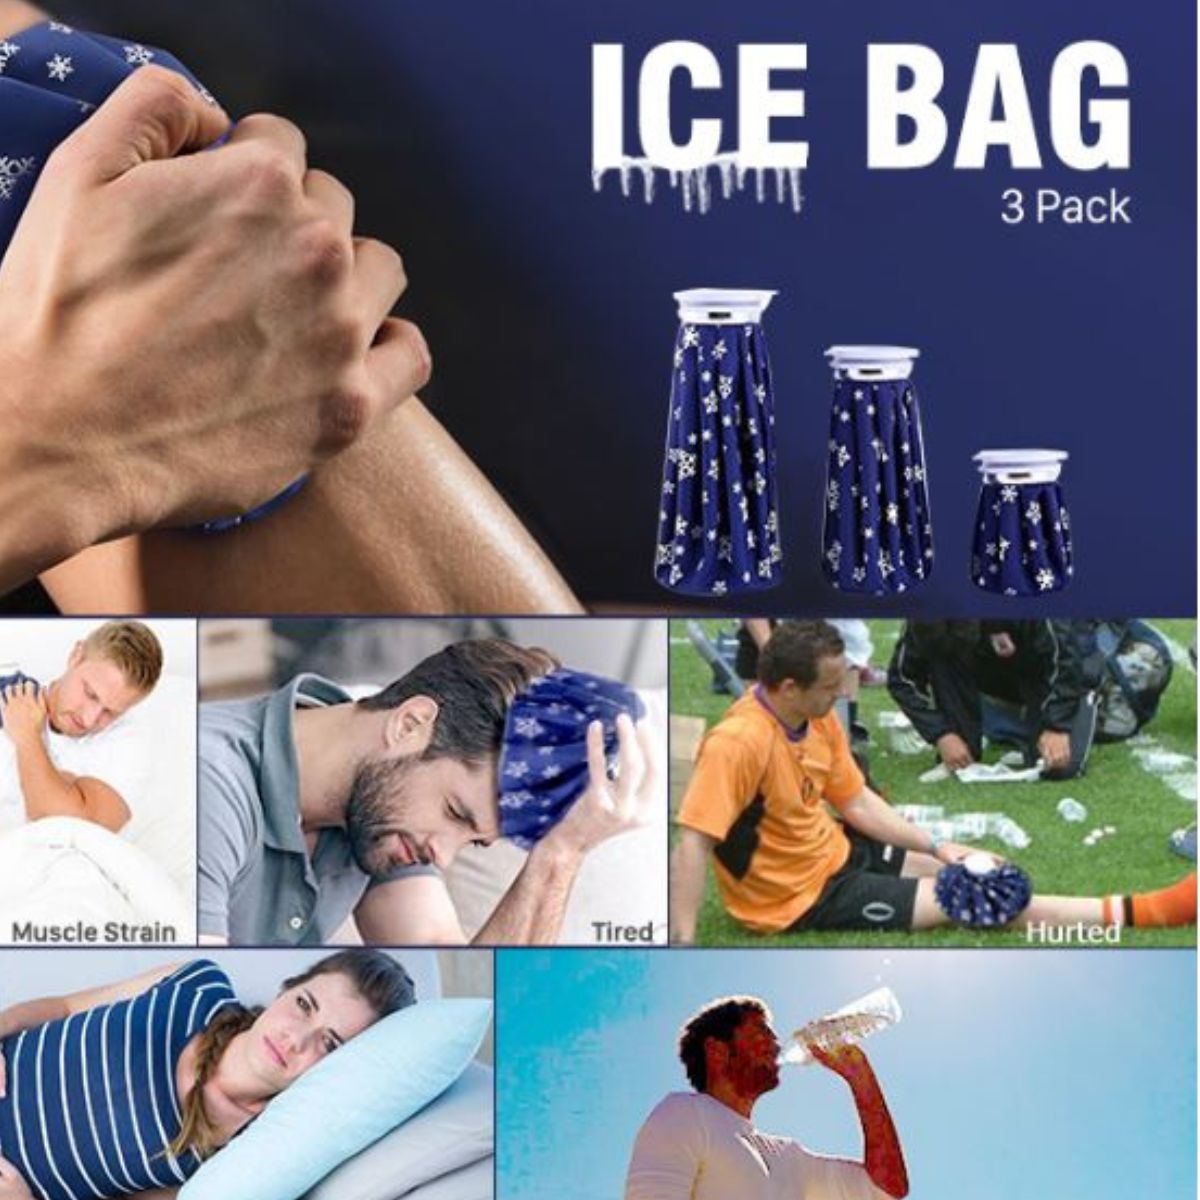 Hot & Cold Ice Pack